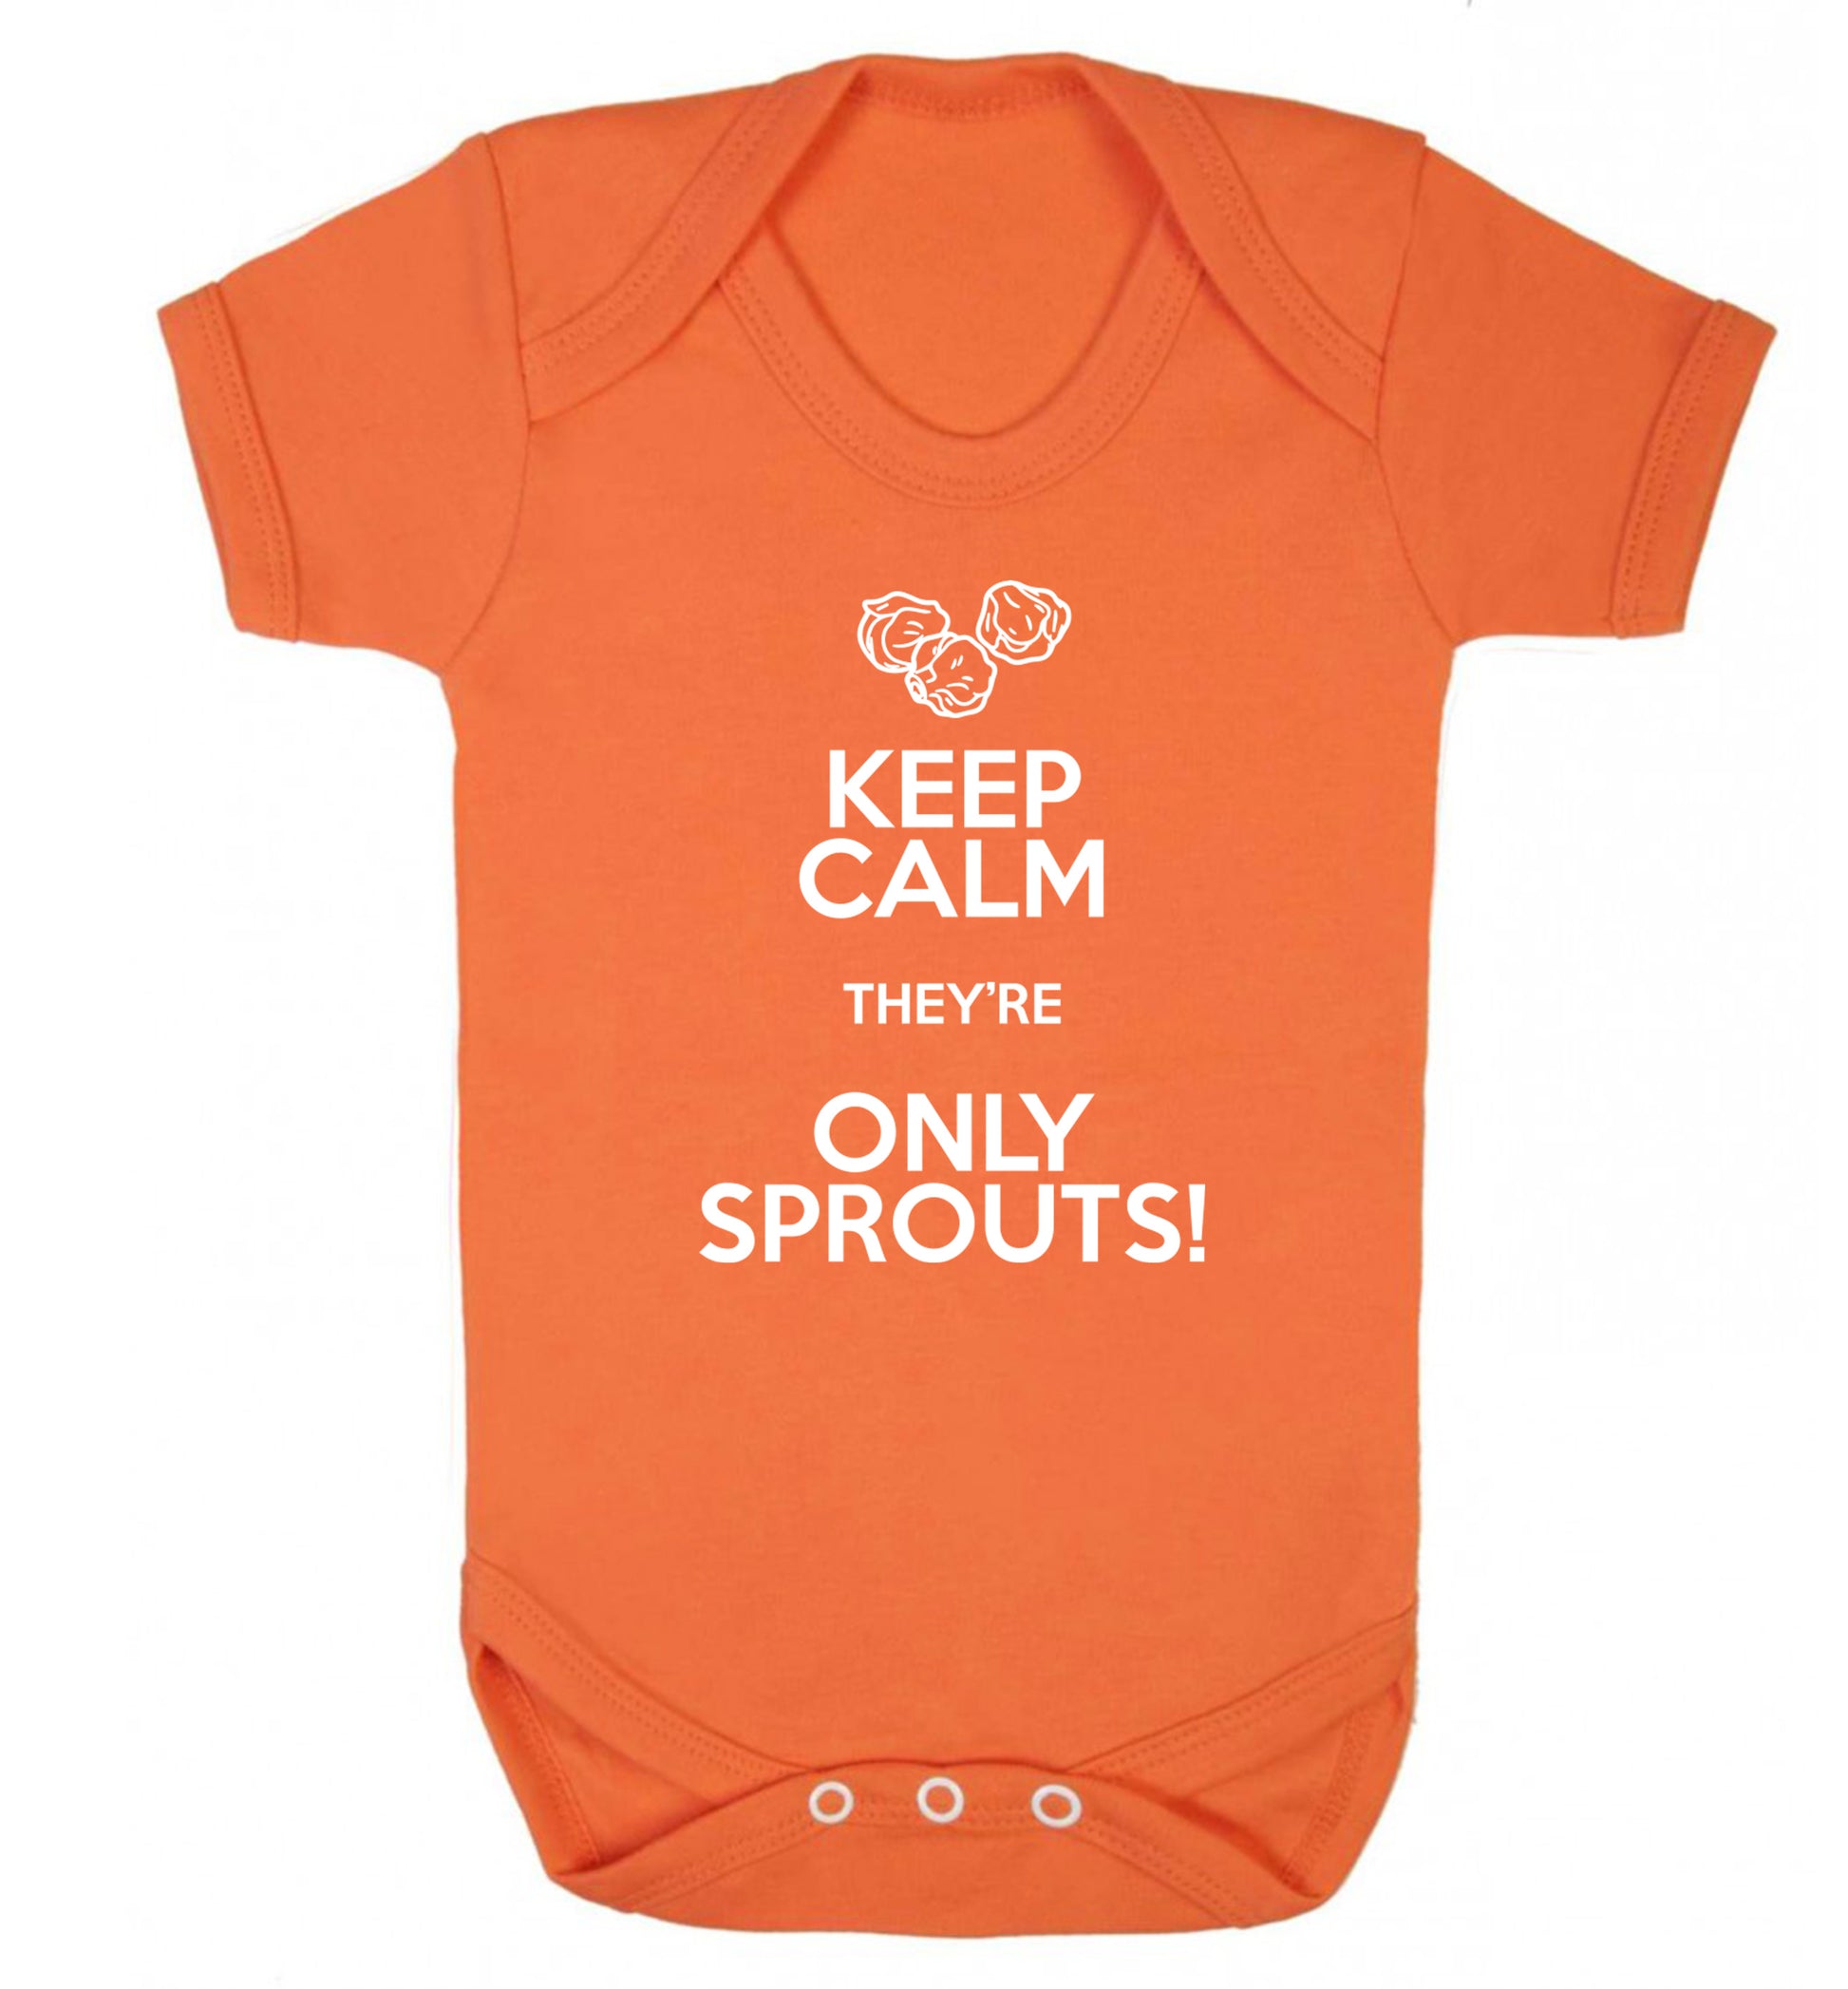 Keep calm they're only sprouts Baby Vest orange 18-24 months